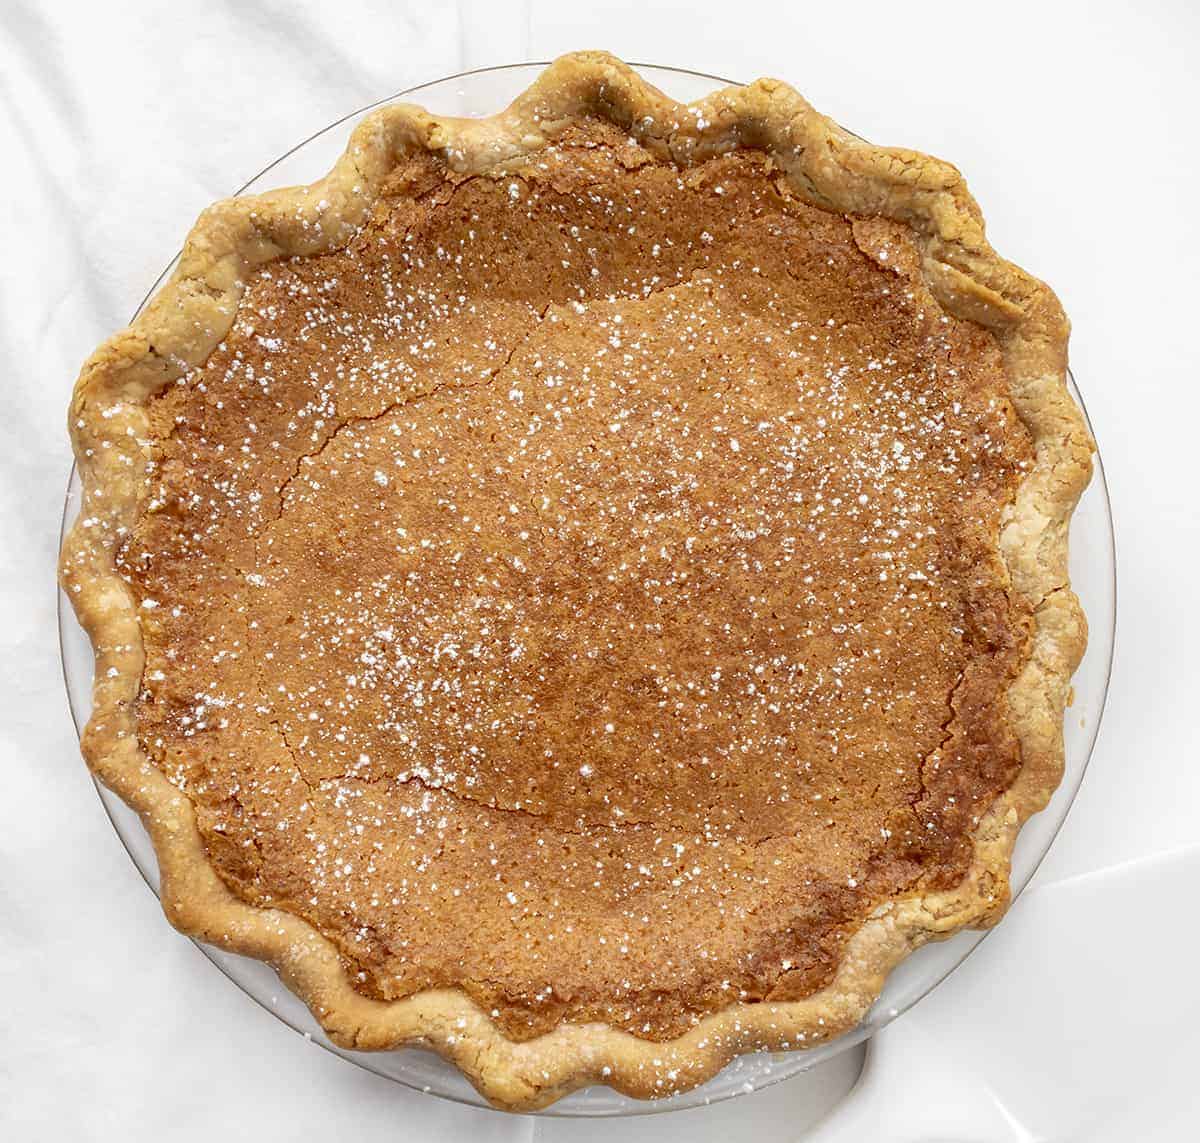 Baked Chess Pie from Overhead on White Surface